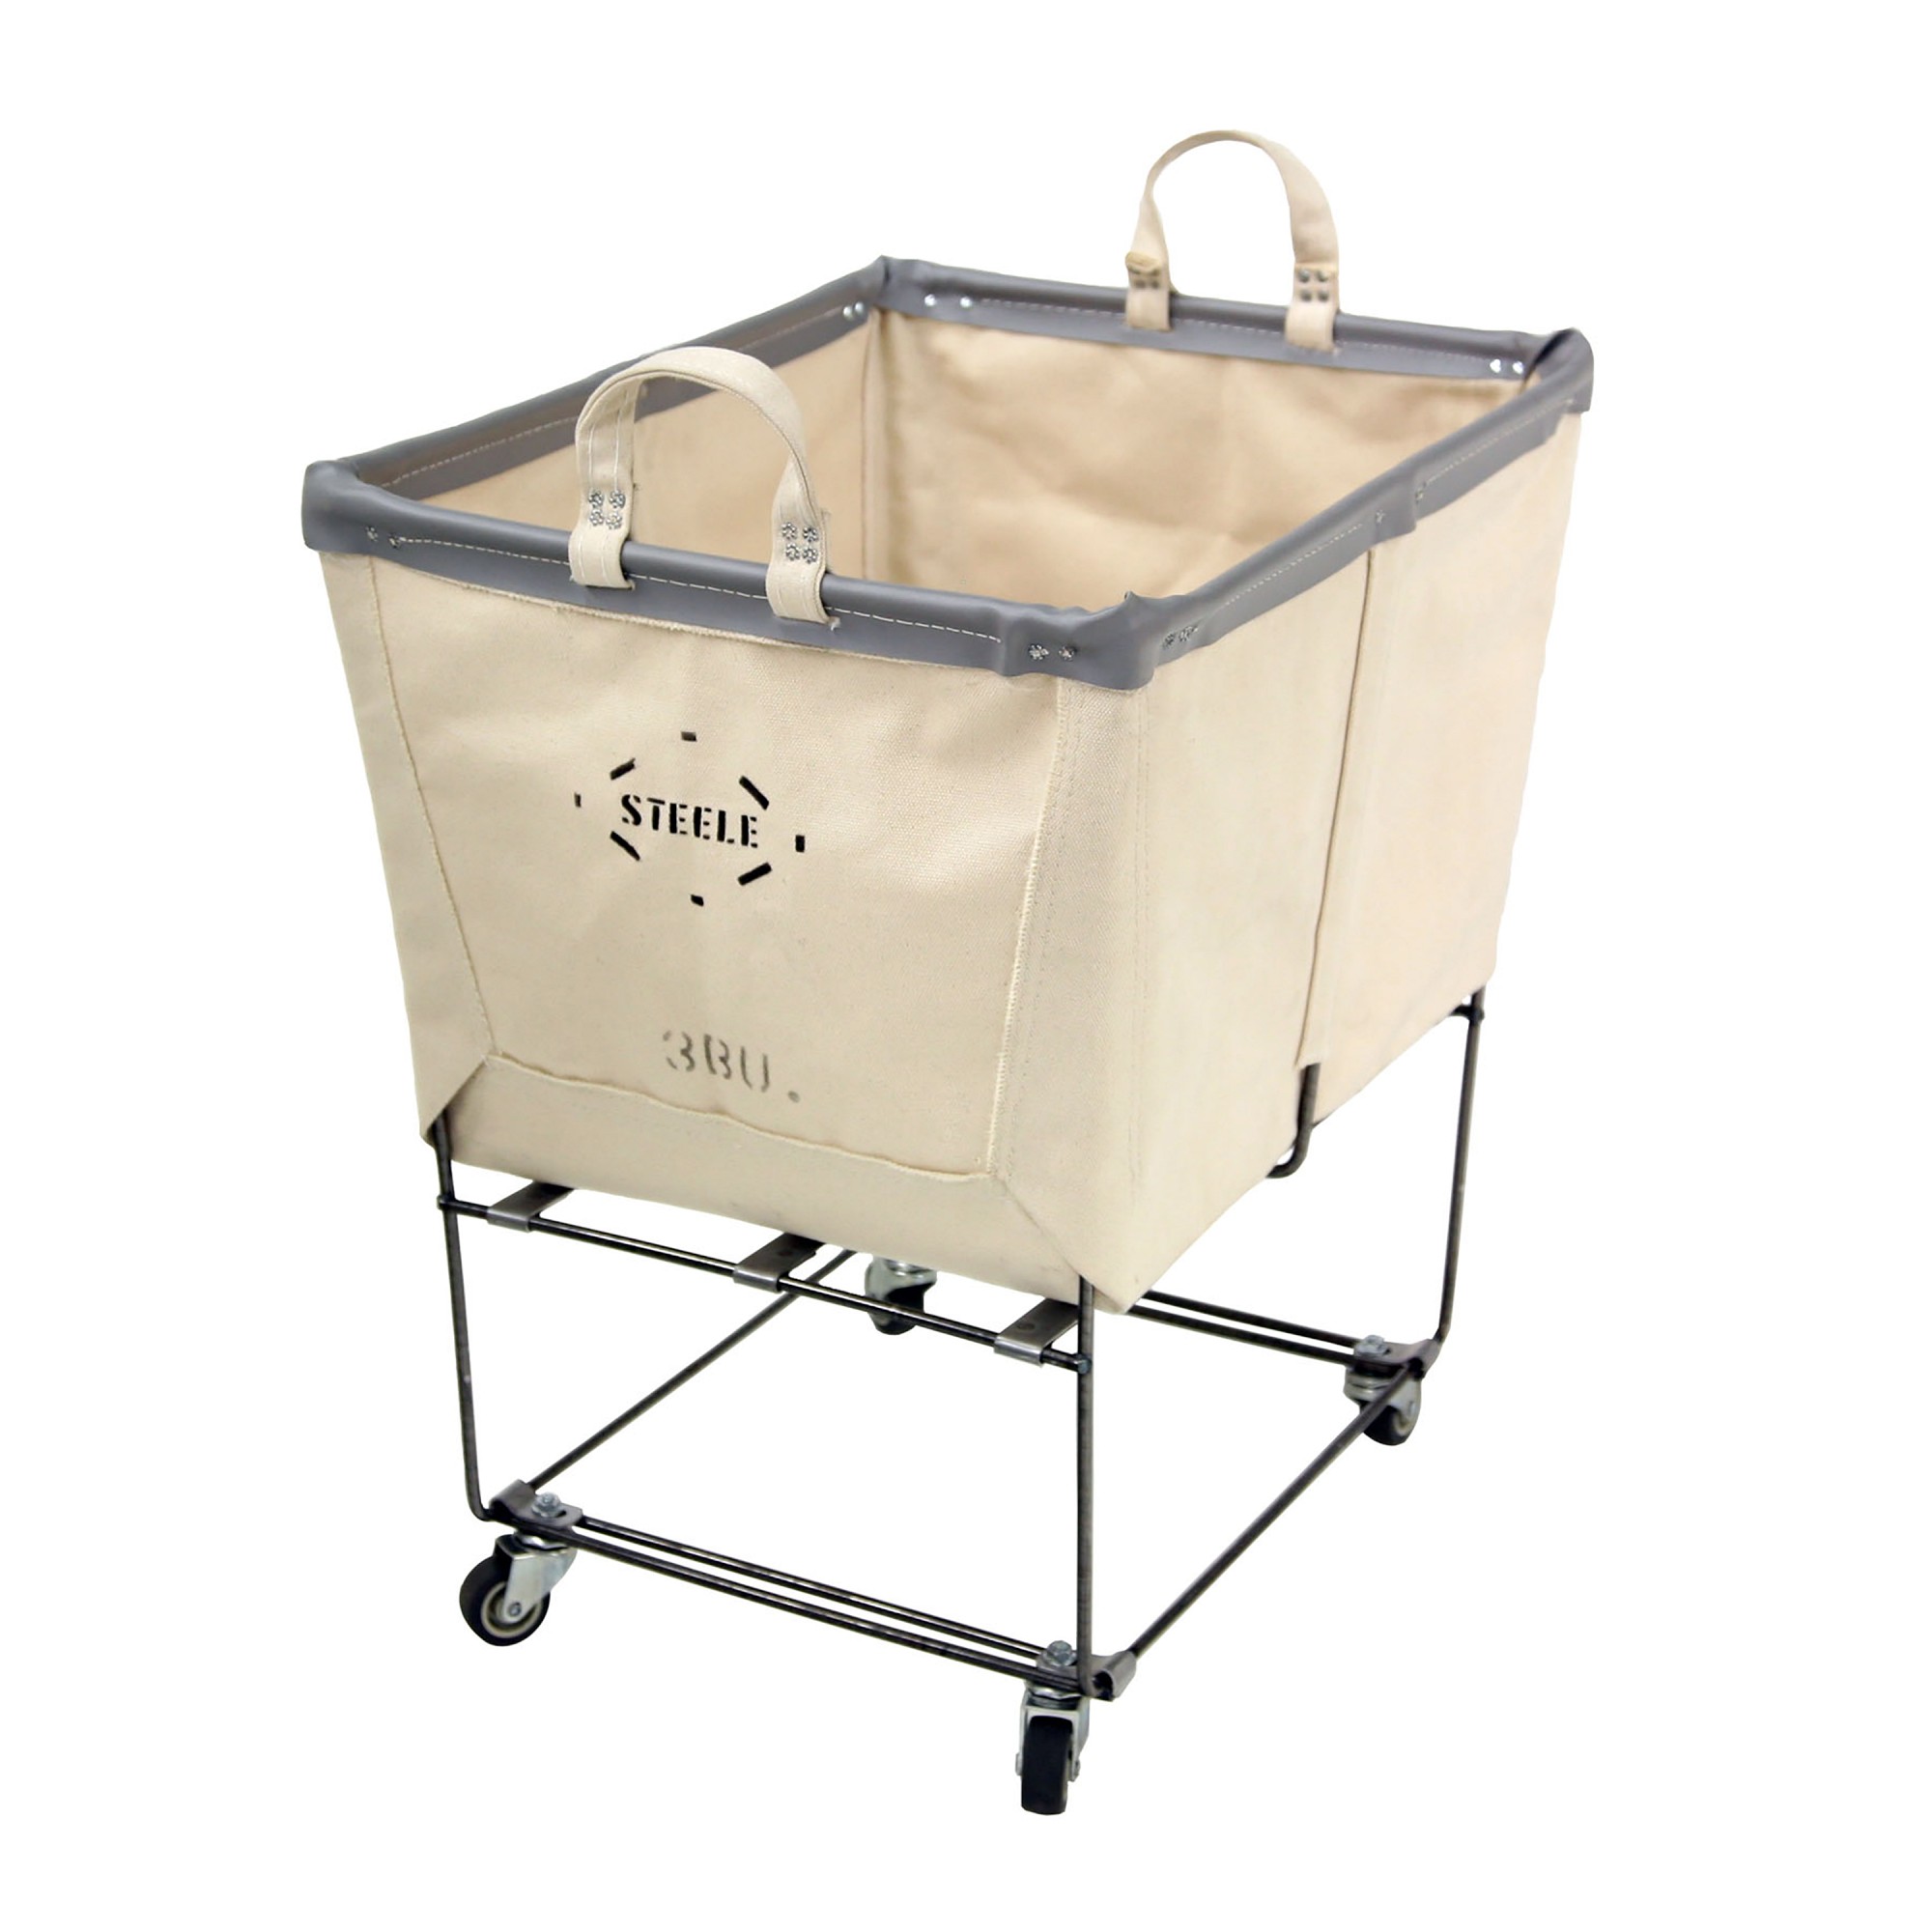 Steele Canvas Elevated Truck Permanent Style, 3 Buckets